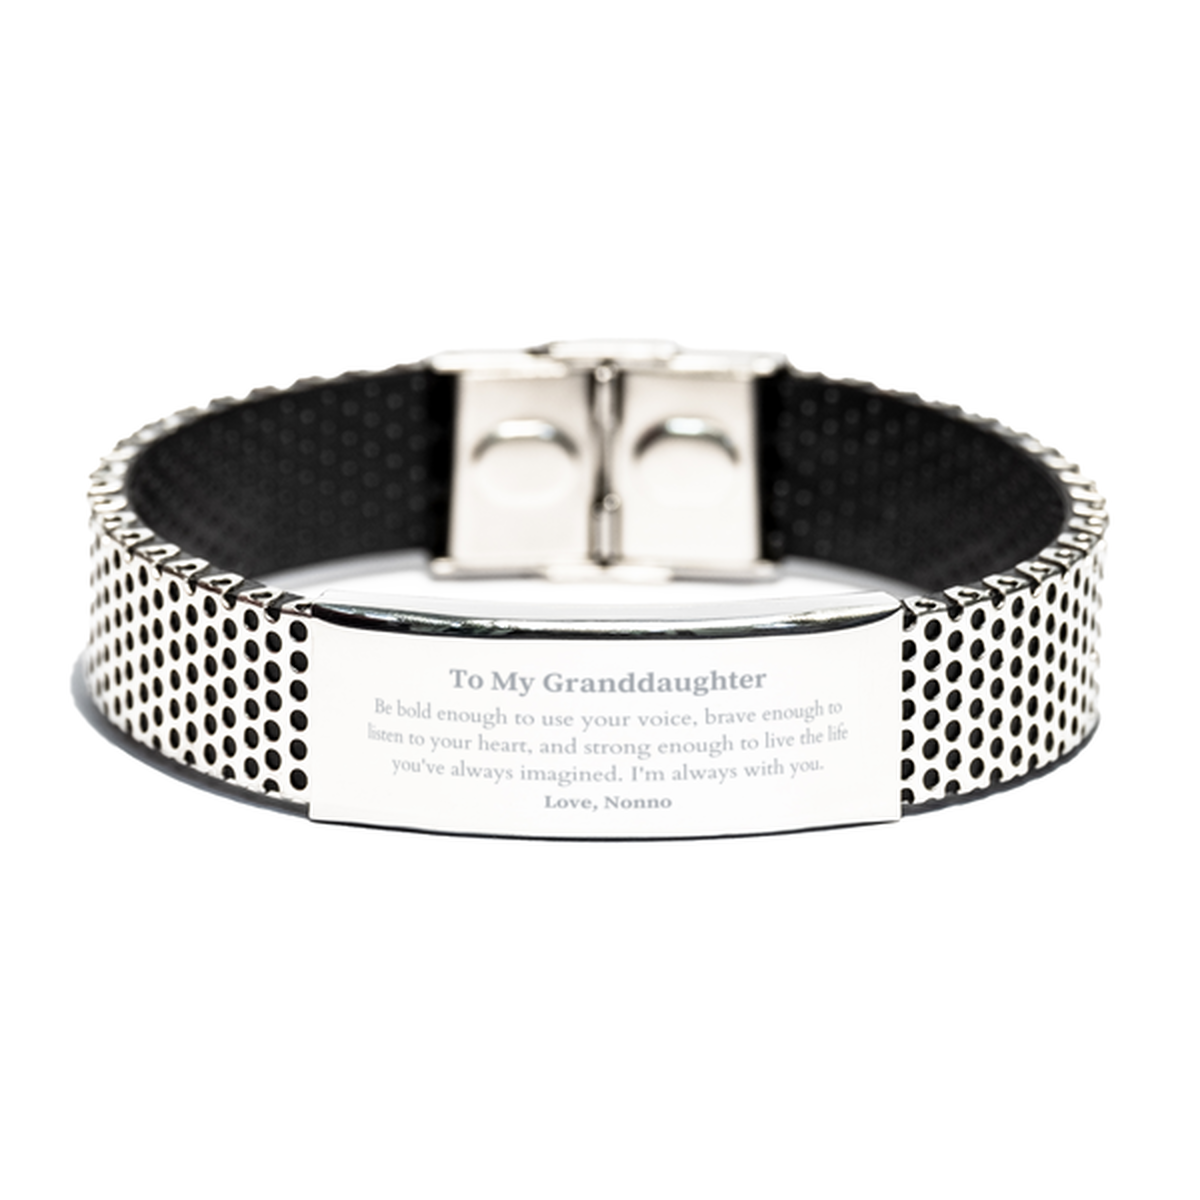 Keepsake Granddaughter Stainless Steel Bracelet Gift Idea Graduation Christmas Birthday Granddaughter from Nonno, Granddaughter Be bold enough to use your voice, brave enough to listen to your heart. Love, Nonno